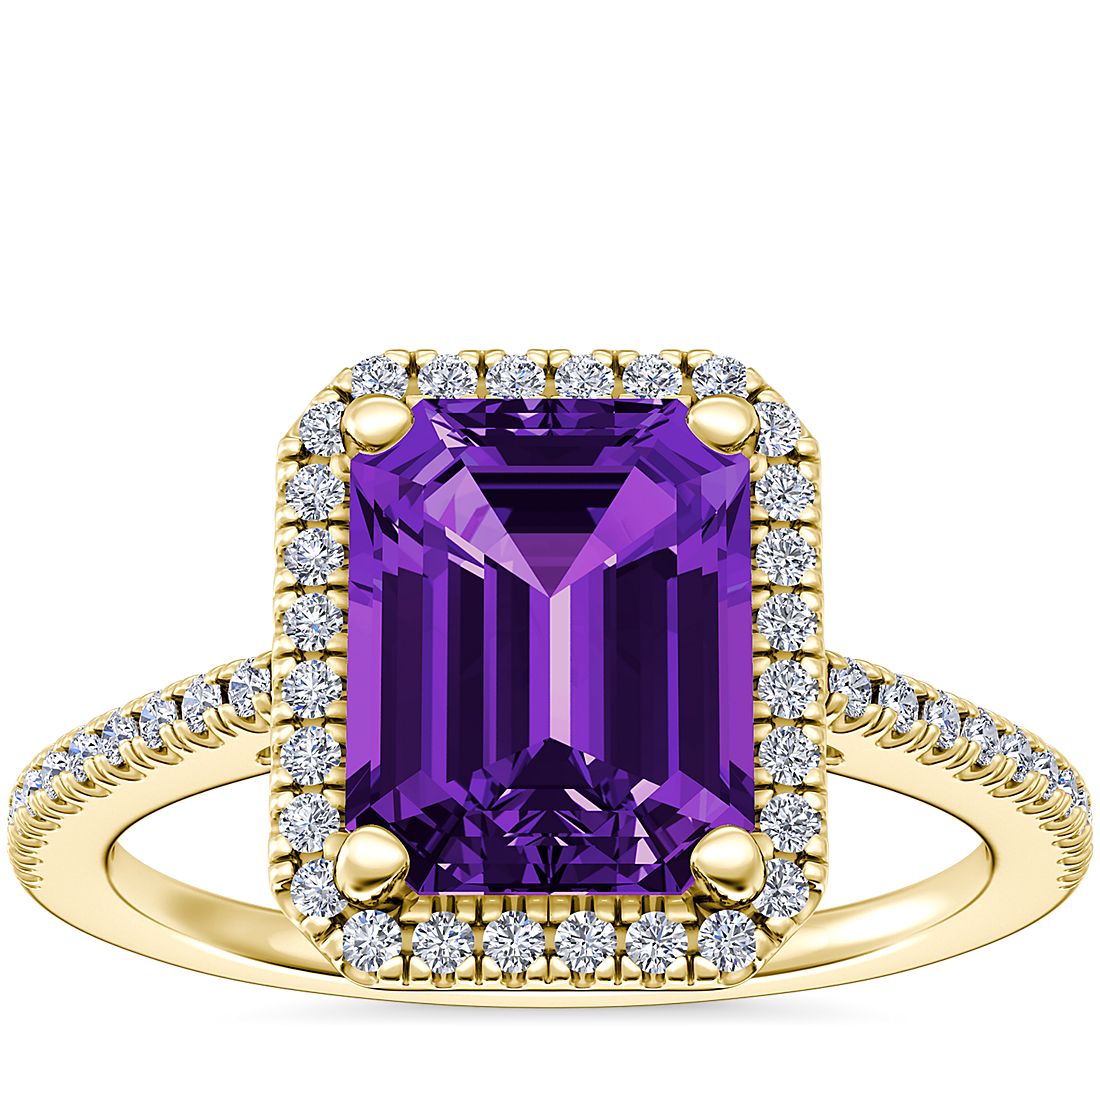 Classic Halo Diamond Engagement Ring with Emerald-Cut Amethyst in 14k Yellow Gold (9x7mm)